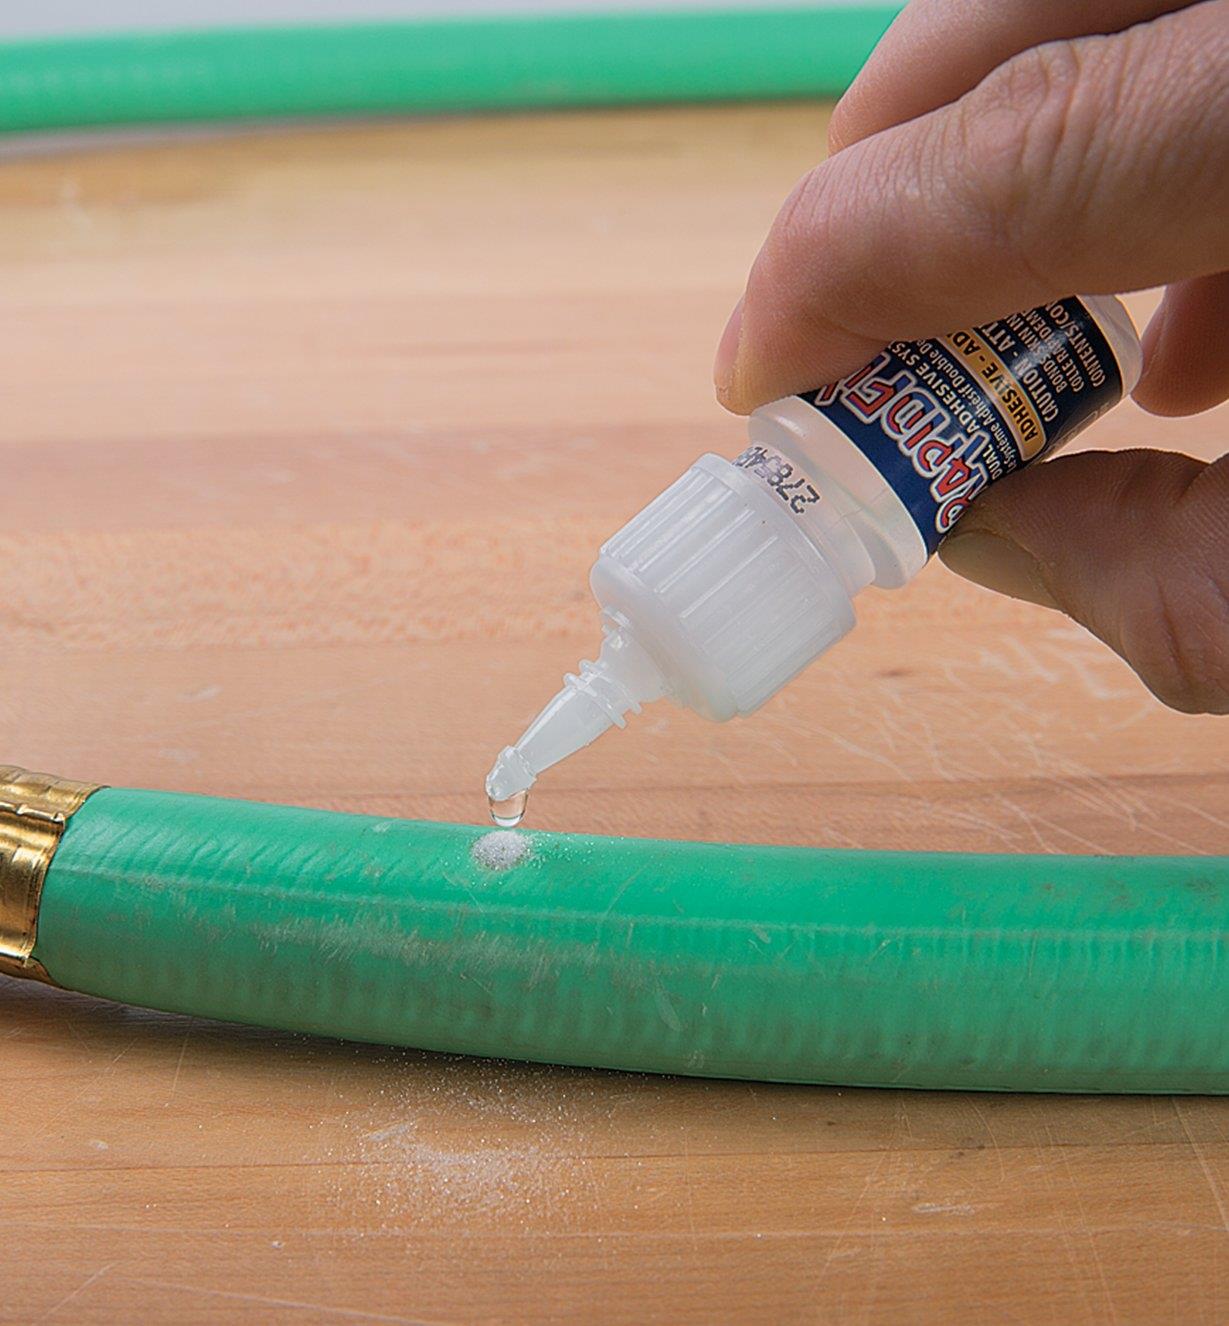 Applying glue over the glue and powder previously applied to the hose